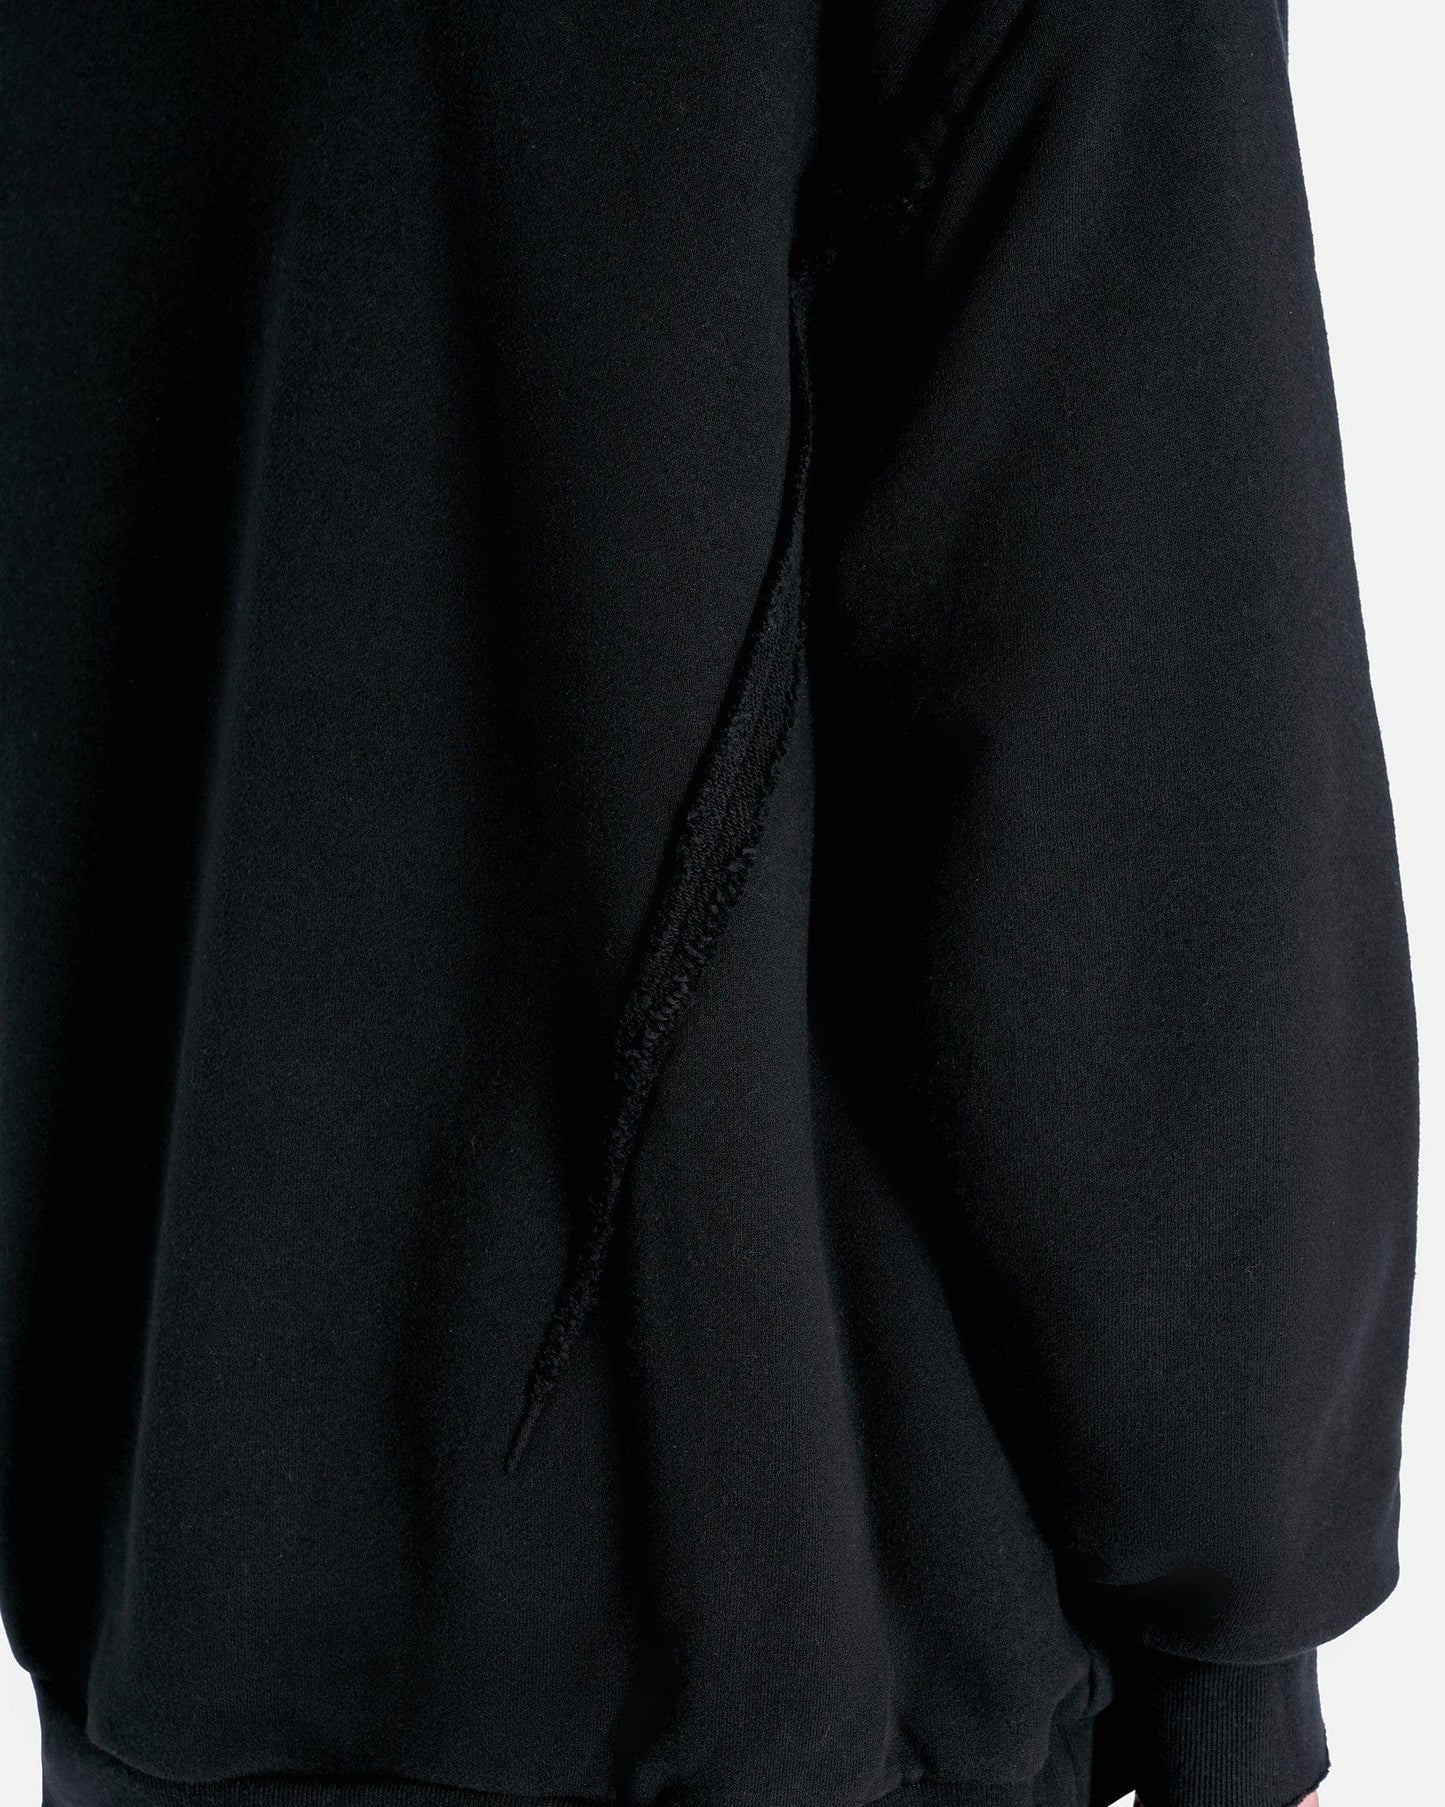 UNDERCOVER Men's Sweater Overstitched Hooded in Black